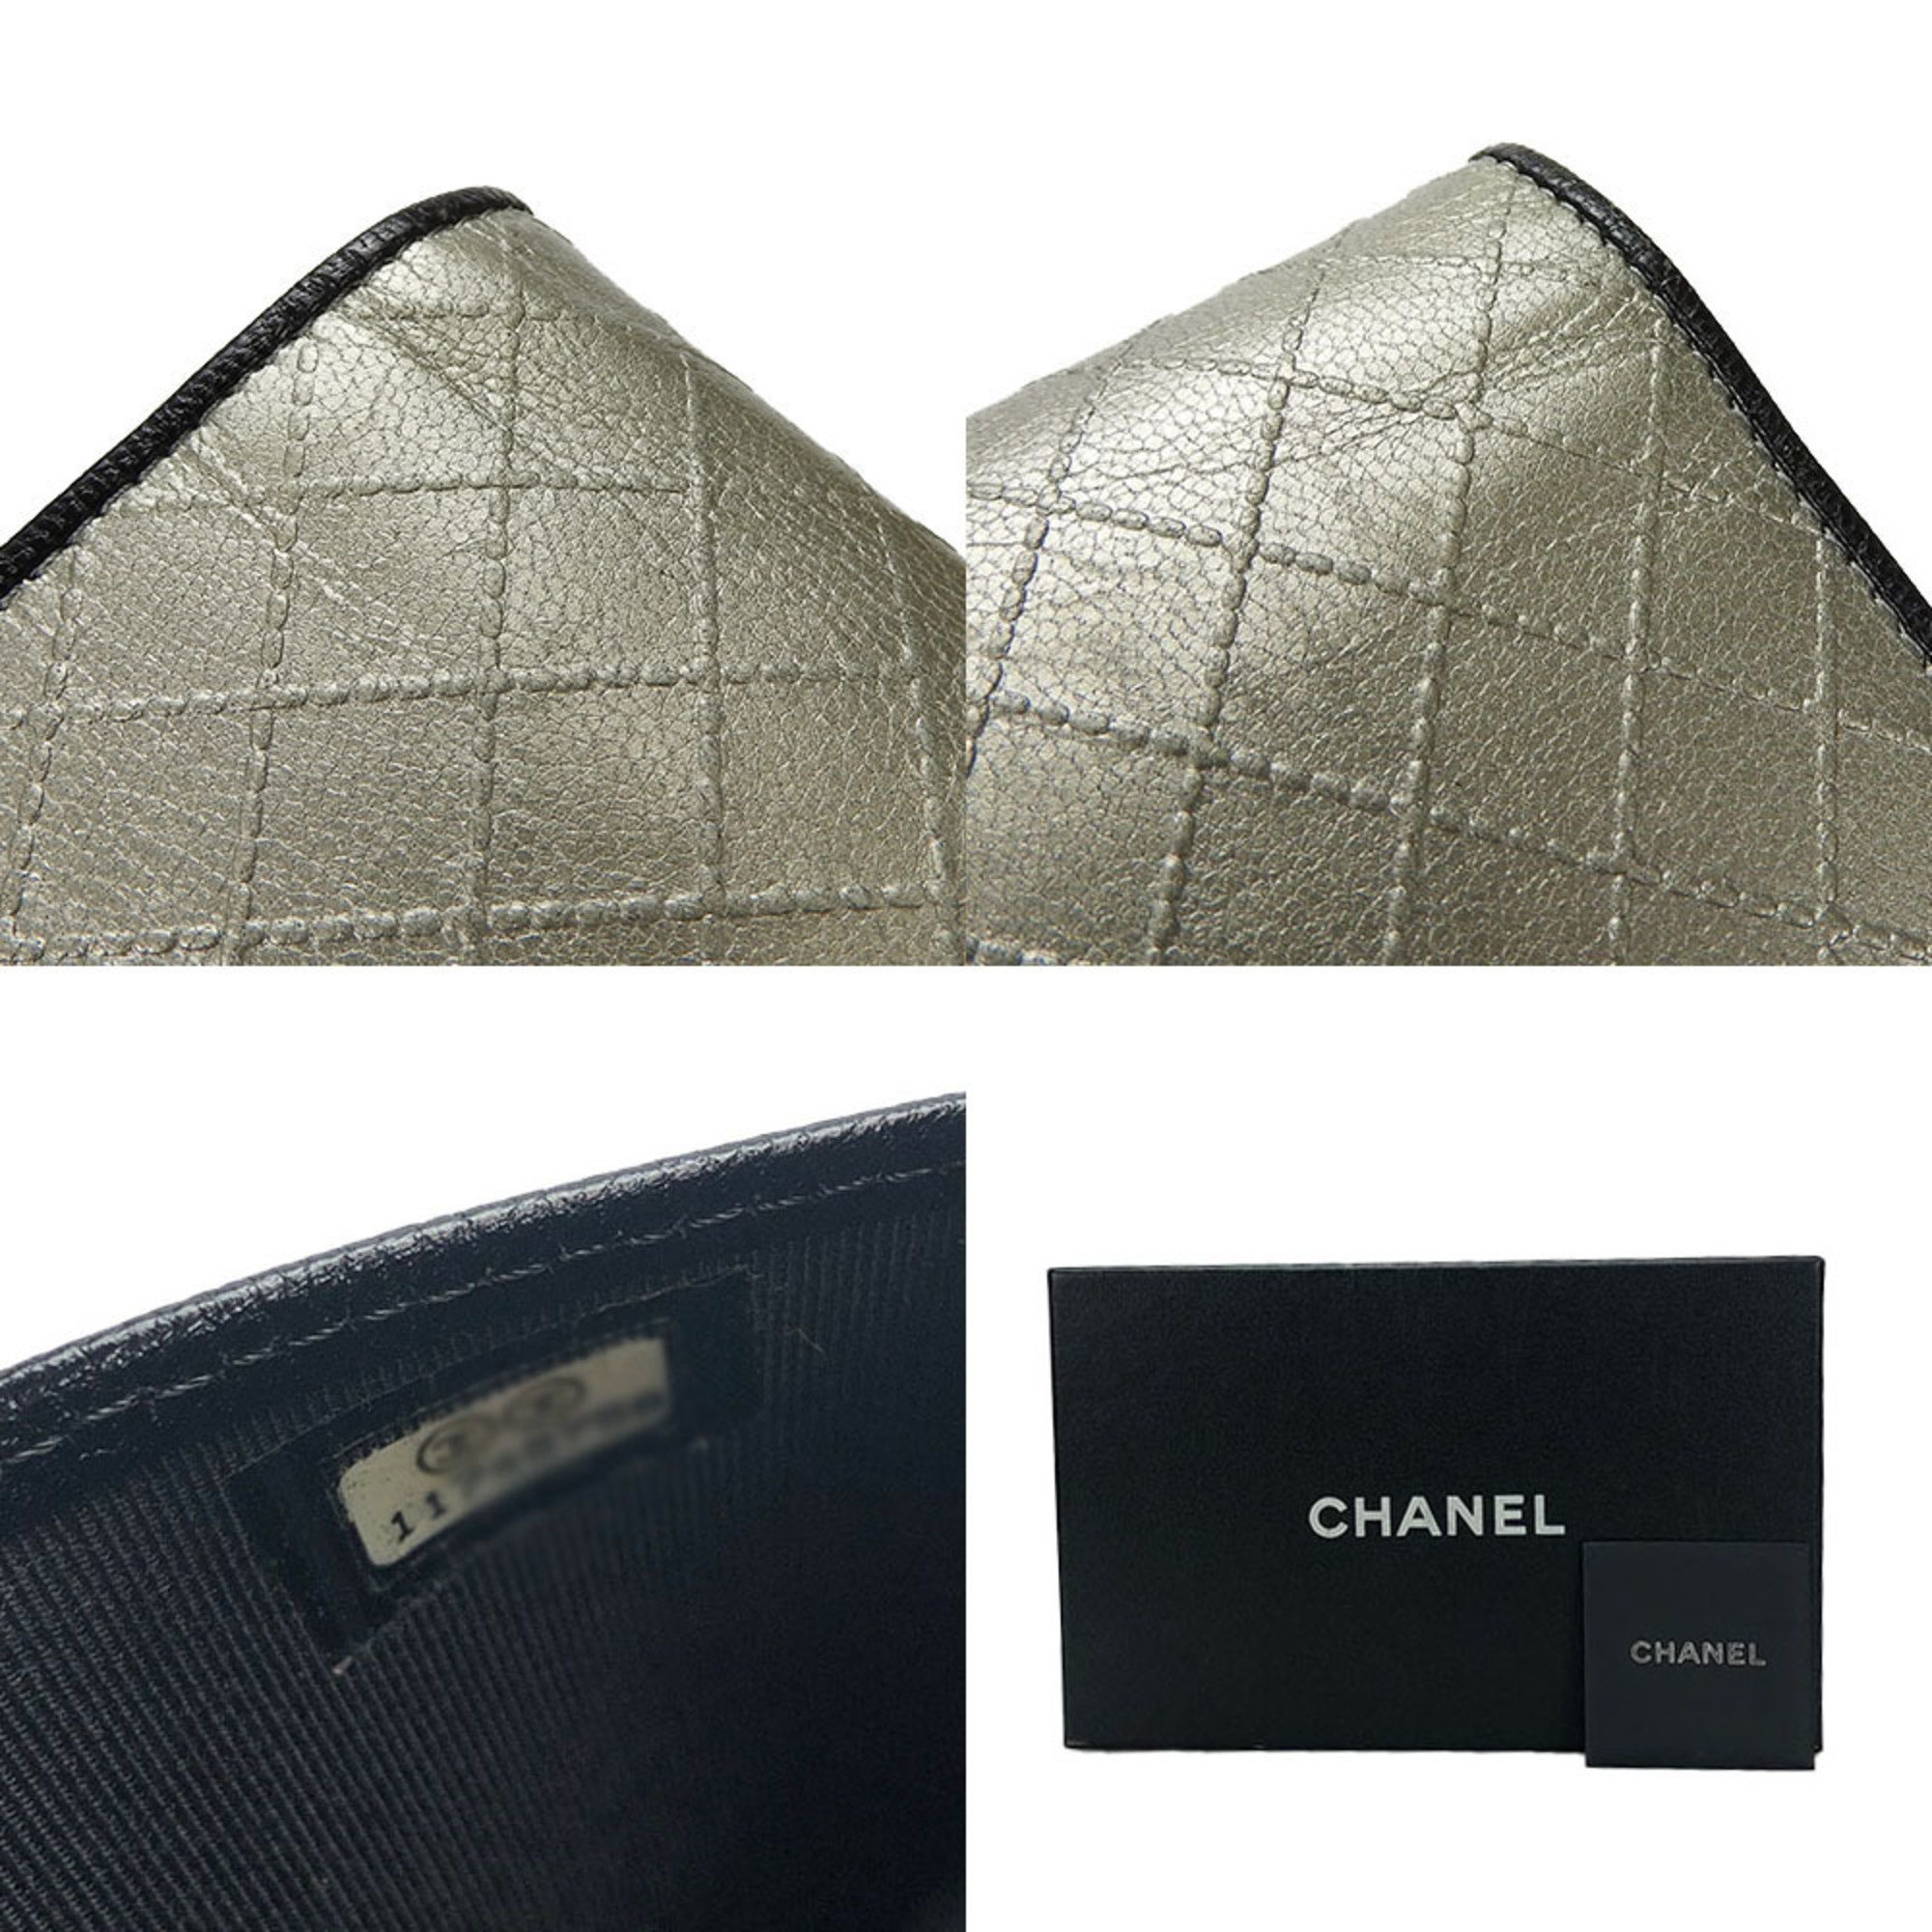 CHANEL Bifold Long Wallet Metallic Silver 1 Coco Mark Coin Purse Leather